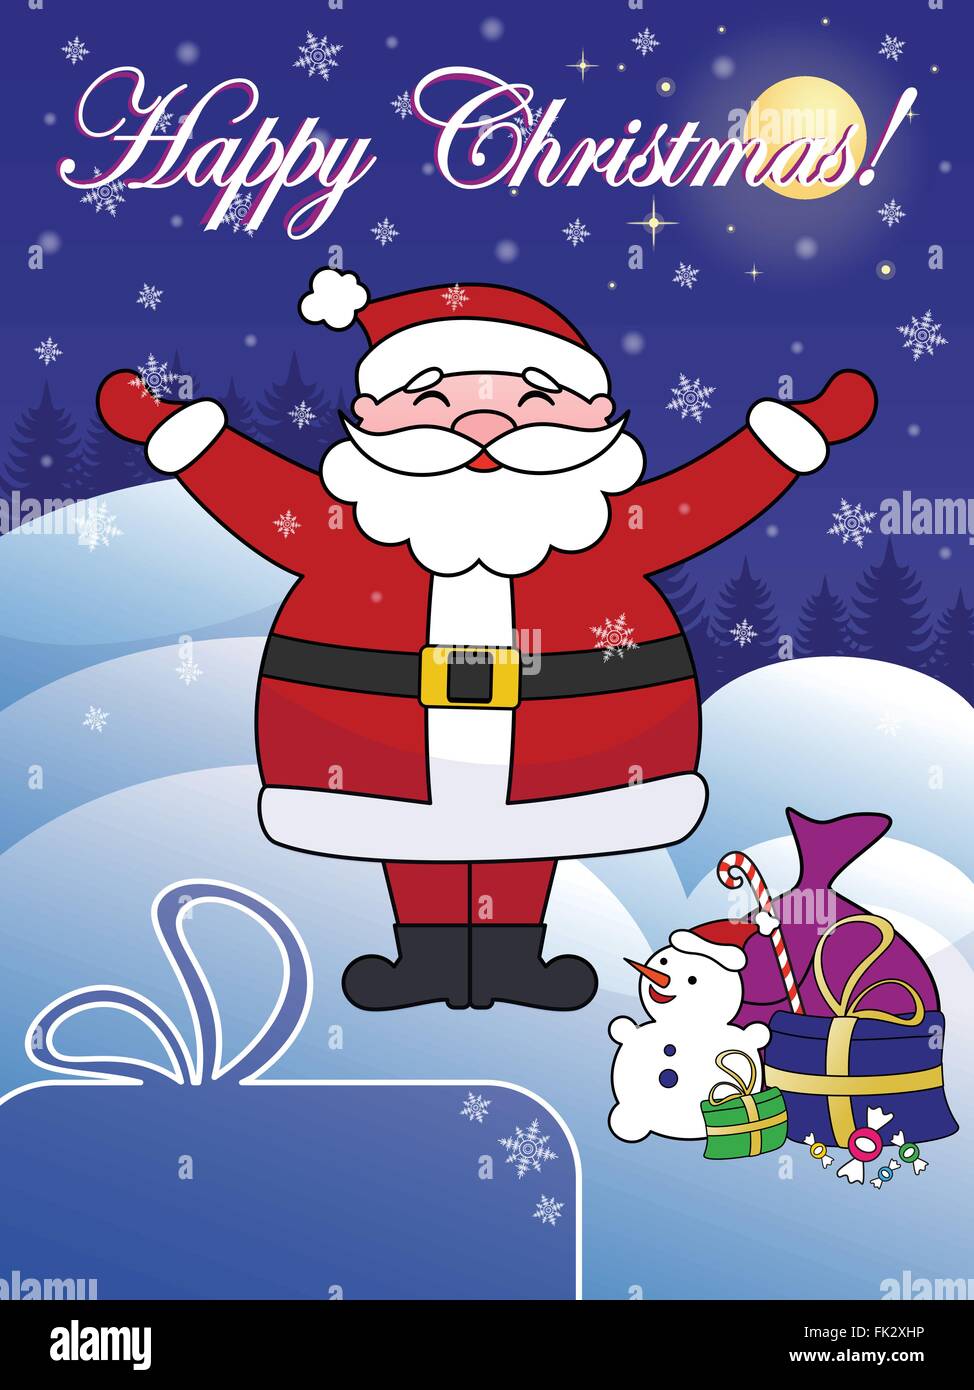 Happy Christmas greeting card with Santa Claus. Copy space in left bottom corner. Title in separate layer for easier editing. Stock Vector